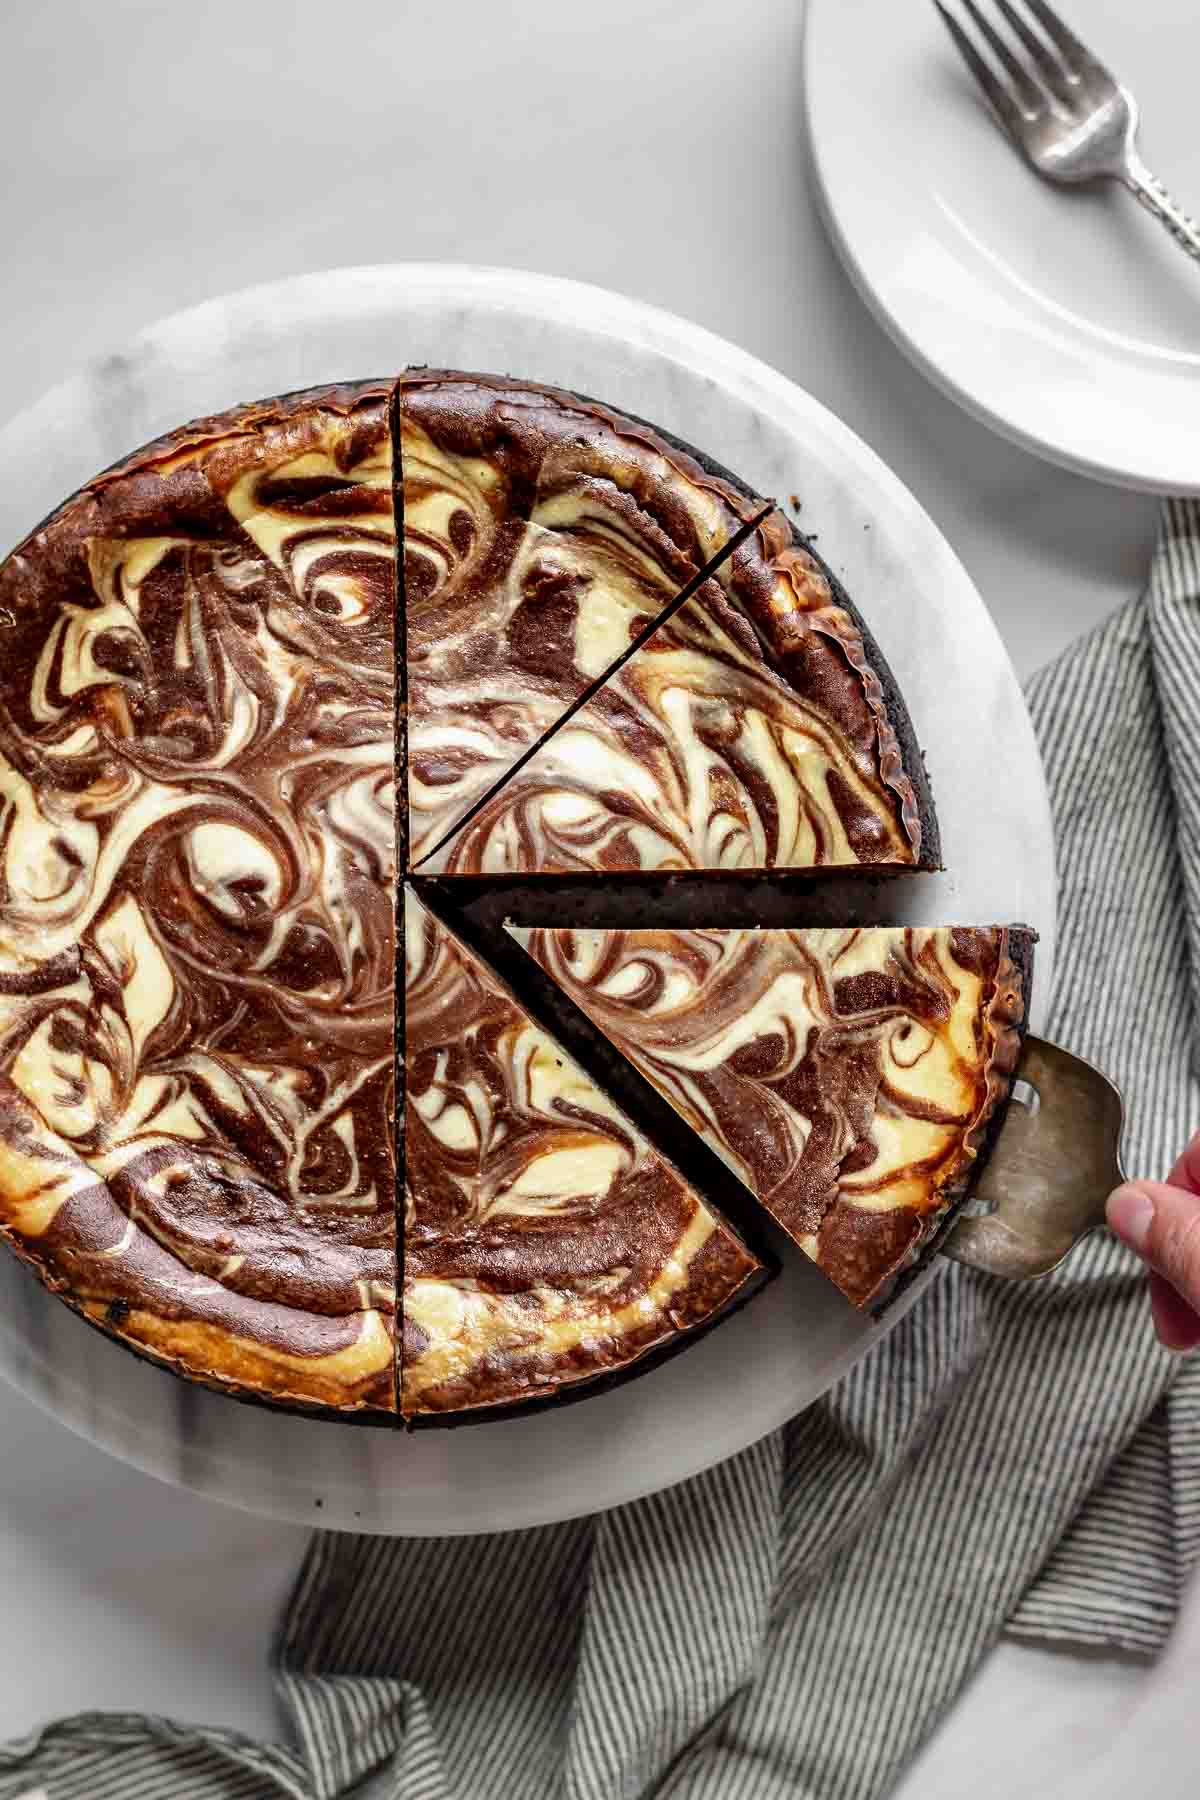 A slice of chocolate marble cheesecake being removed from a platter.